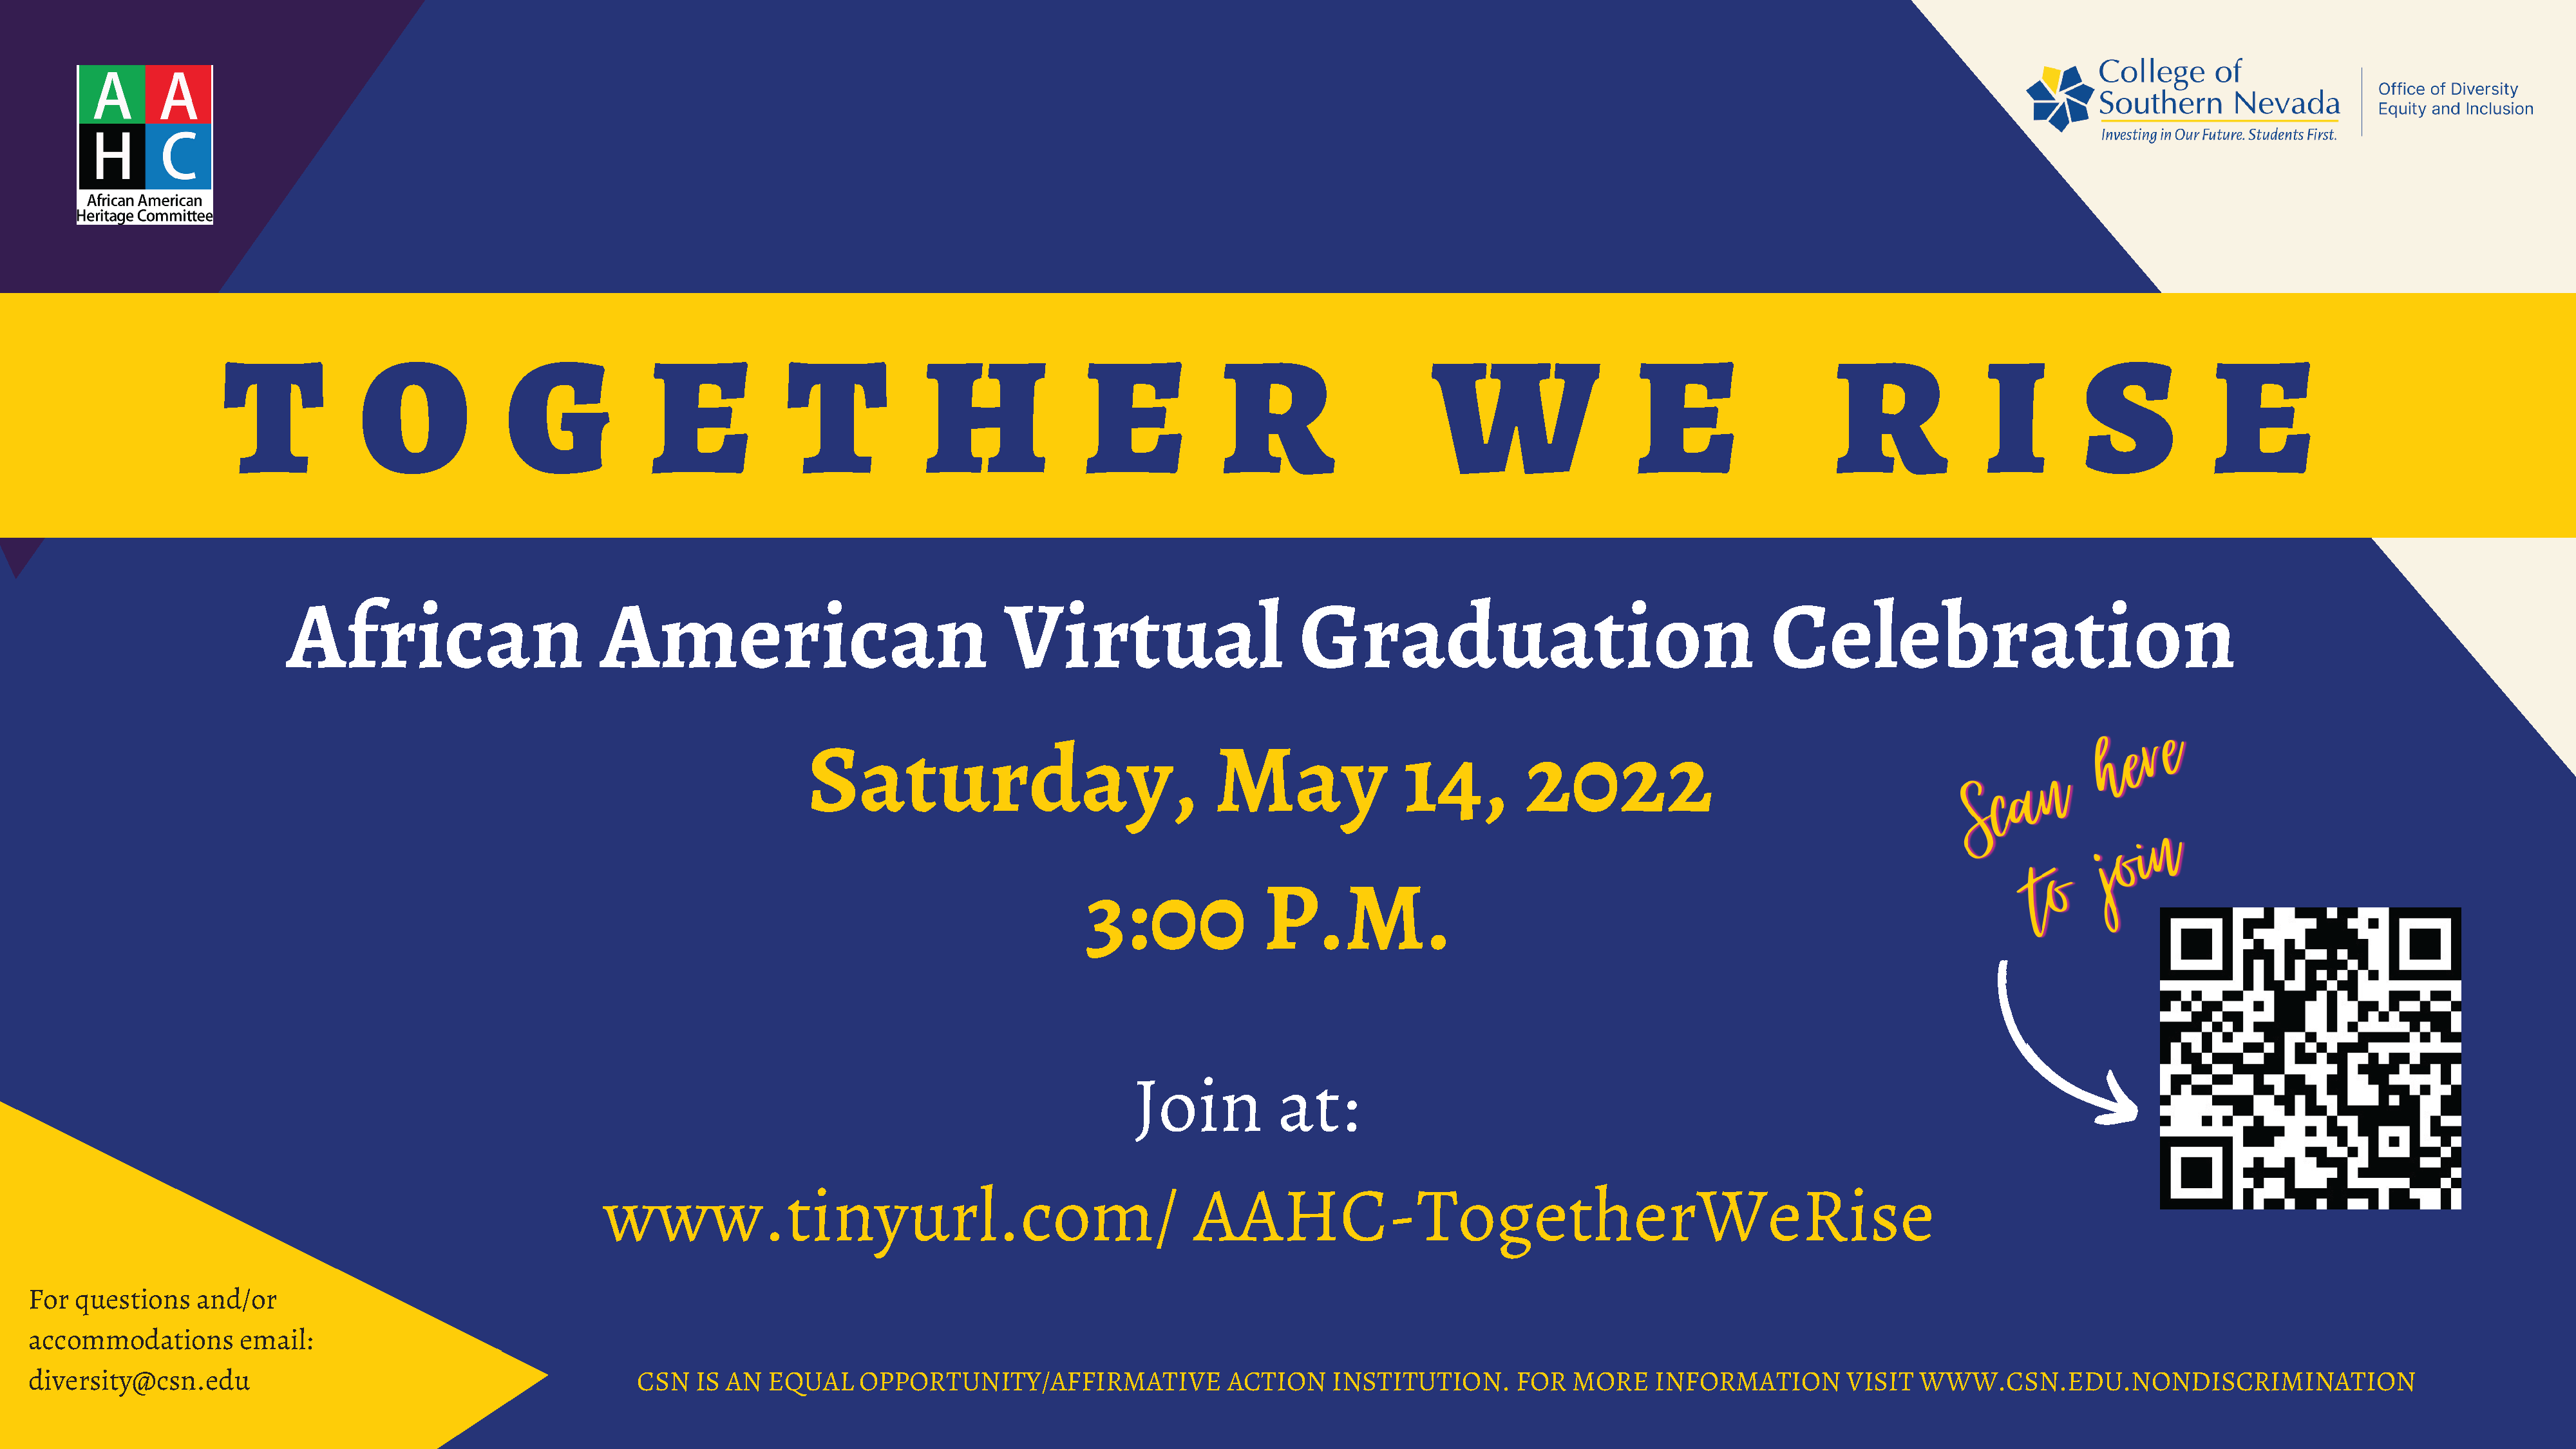 African American Heritage Committee virtual graduation celebration event flyer